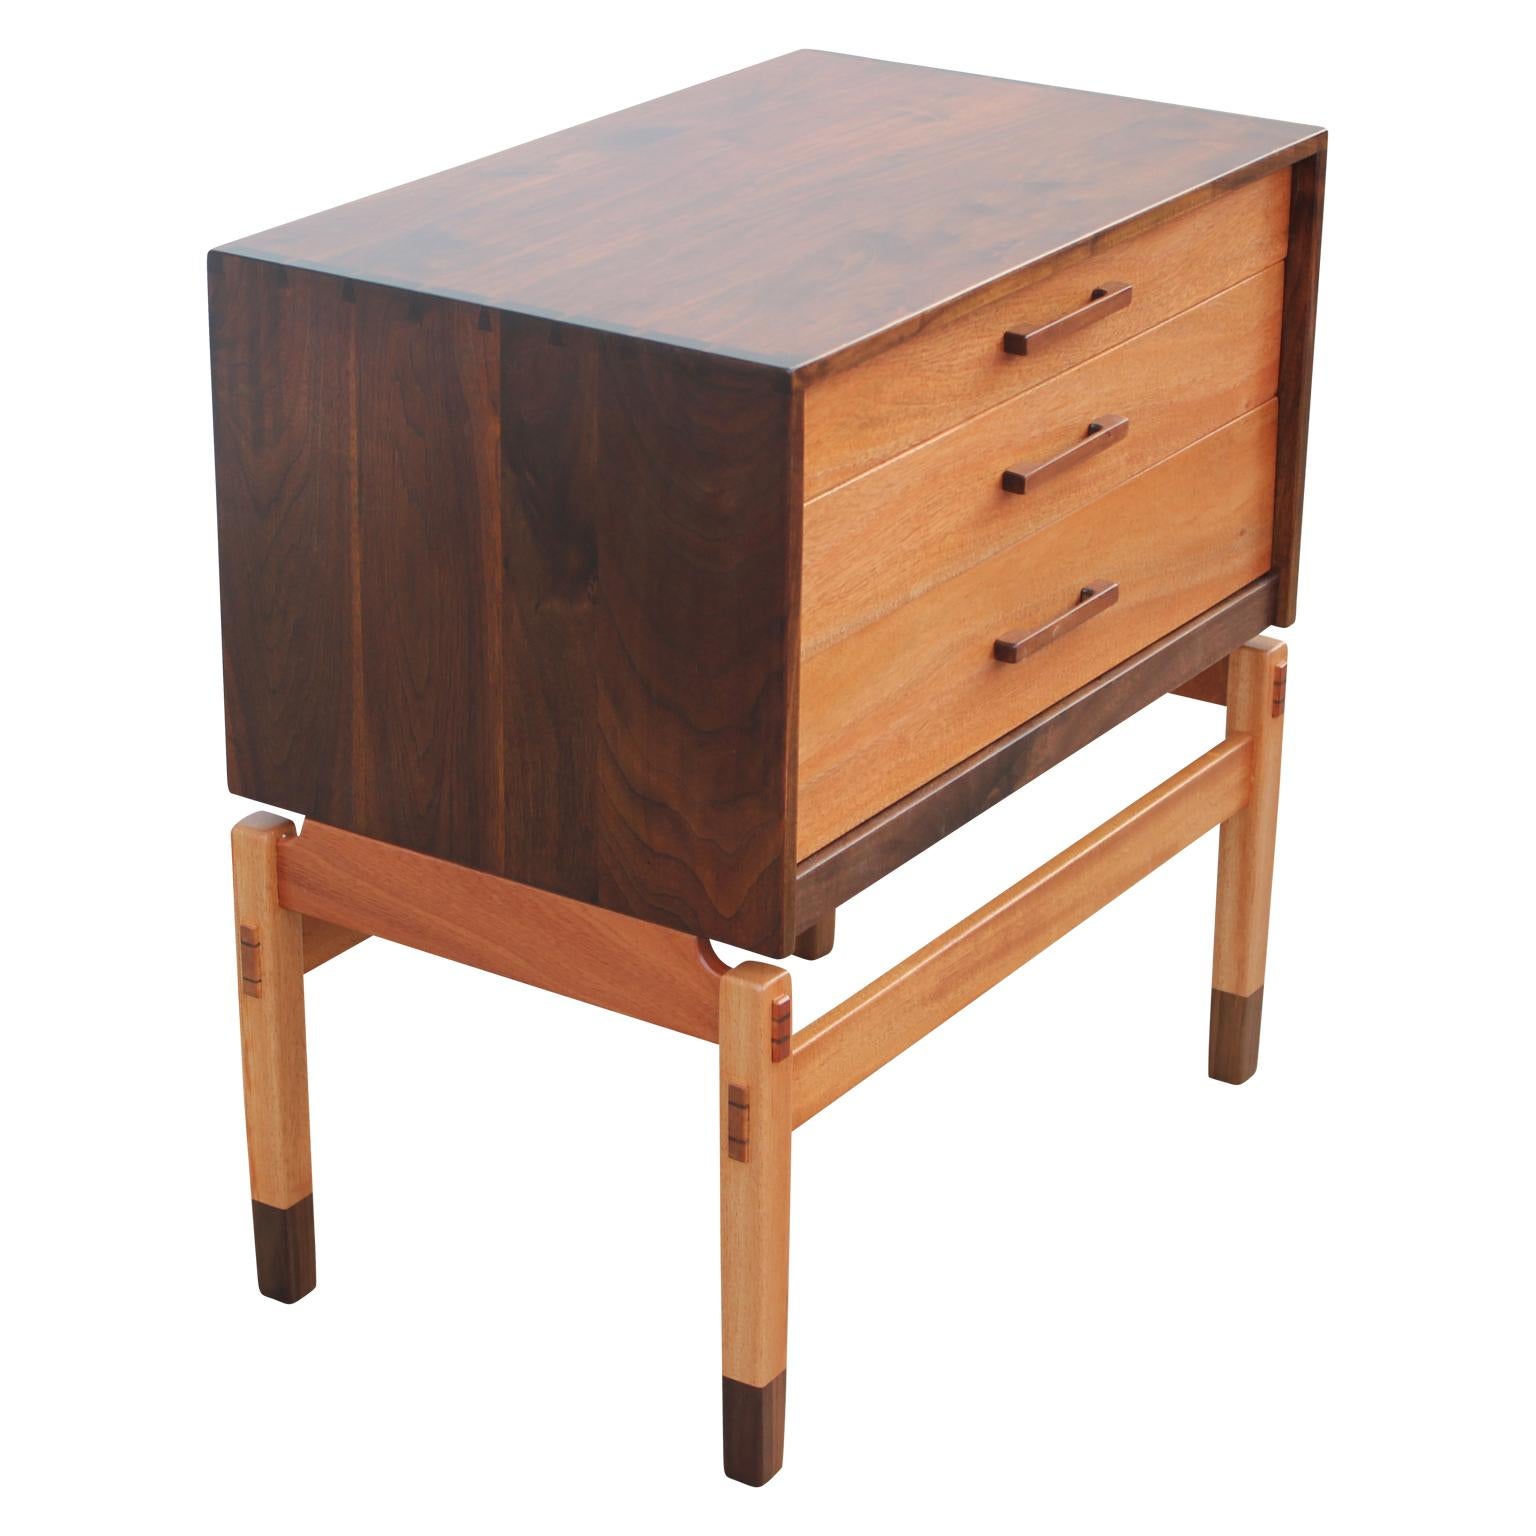 American Modern Danish Style Two Tone Walnut Nightstand / Small Chest by Norm Stoeker